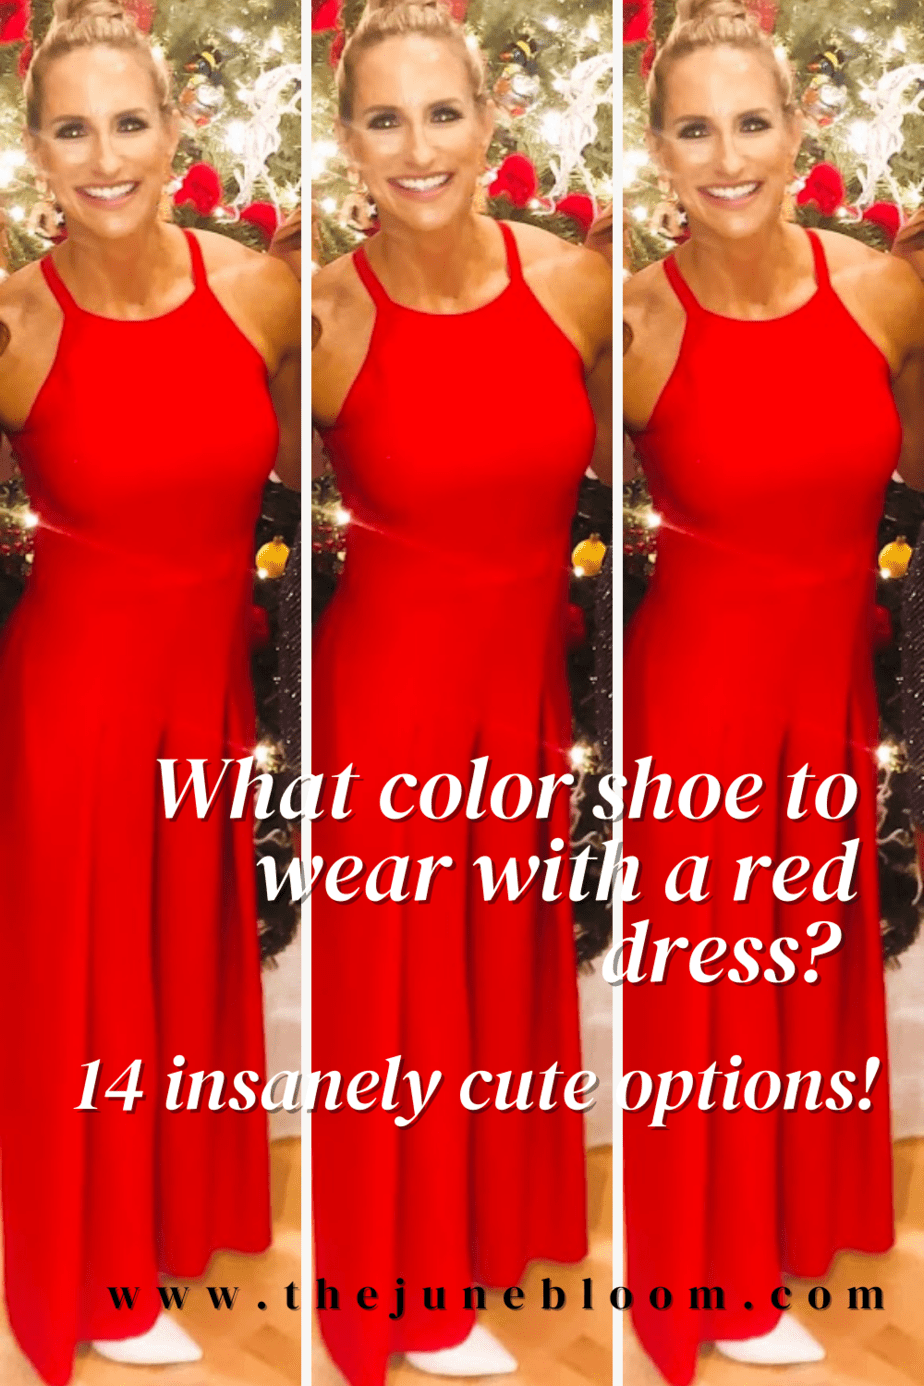 What color shoes to wear with a red dress